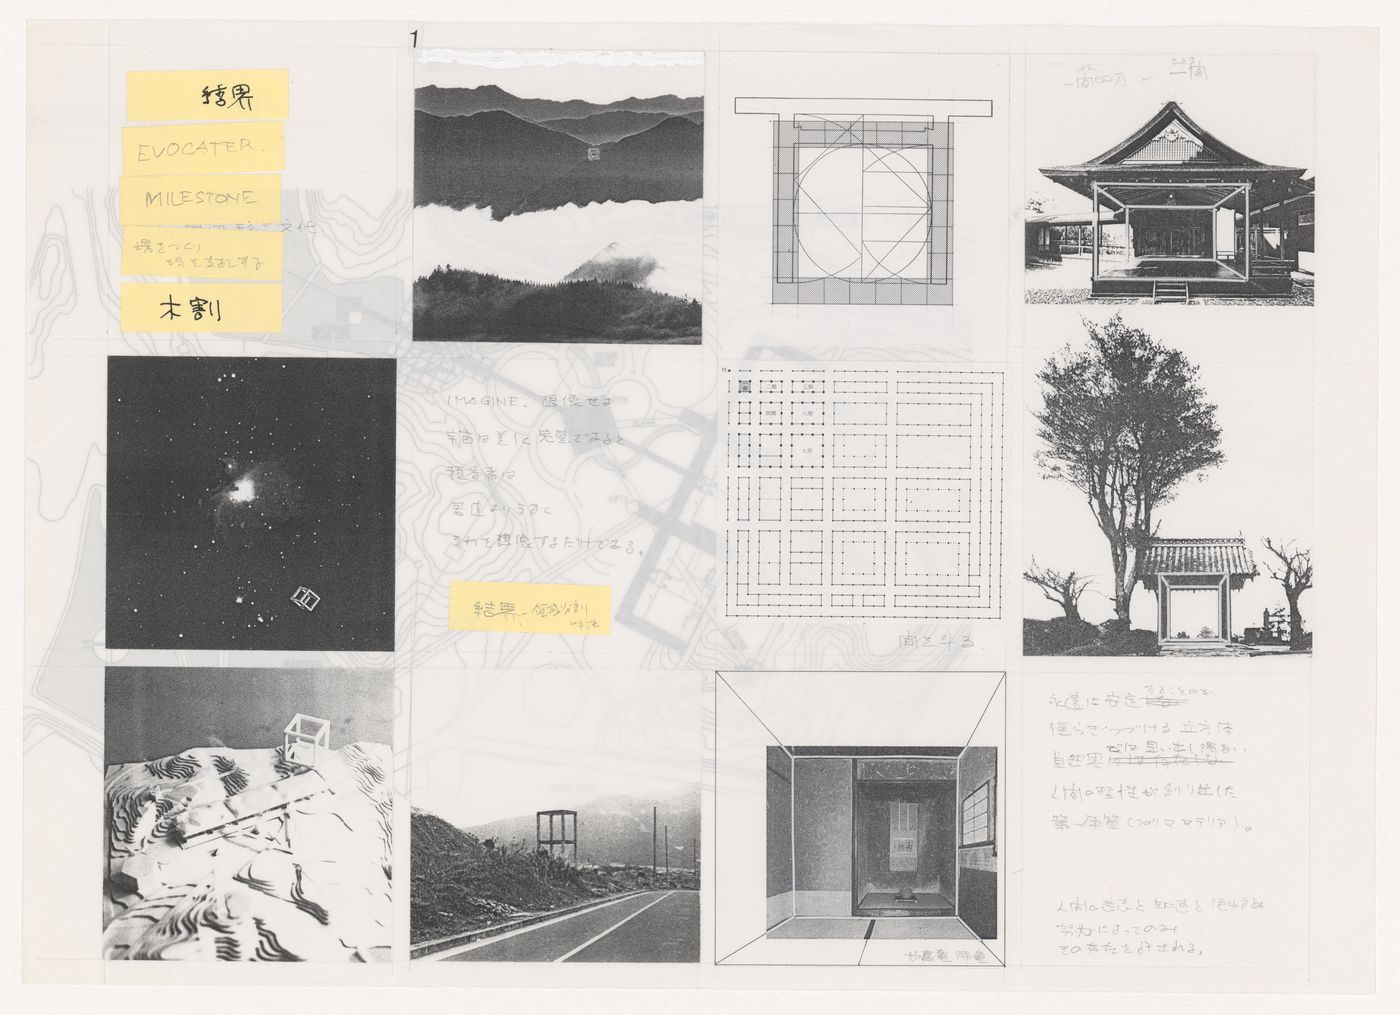 Collage of cubic forms and key words, from the project file "Prospecta Toyama '92 Observatory Tower, Imizu, Japan"; Site plan for 1st Japan Expo Toyama in 1992, from the project file "Prospecta Toyama '92 Observatory Tower, Imizu, Japan"